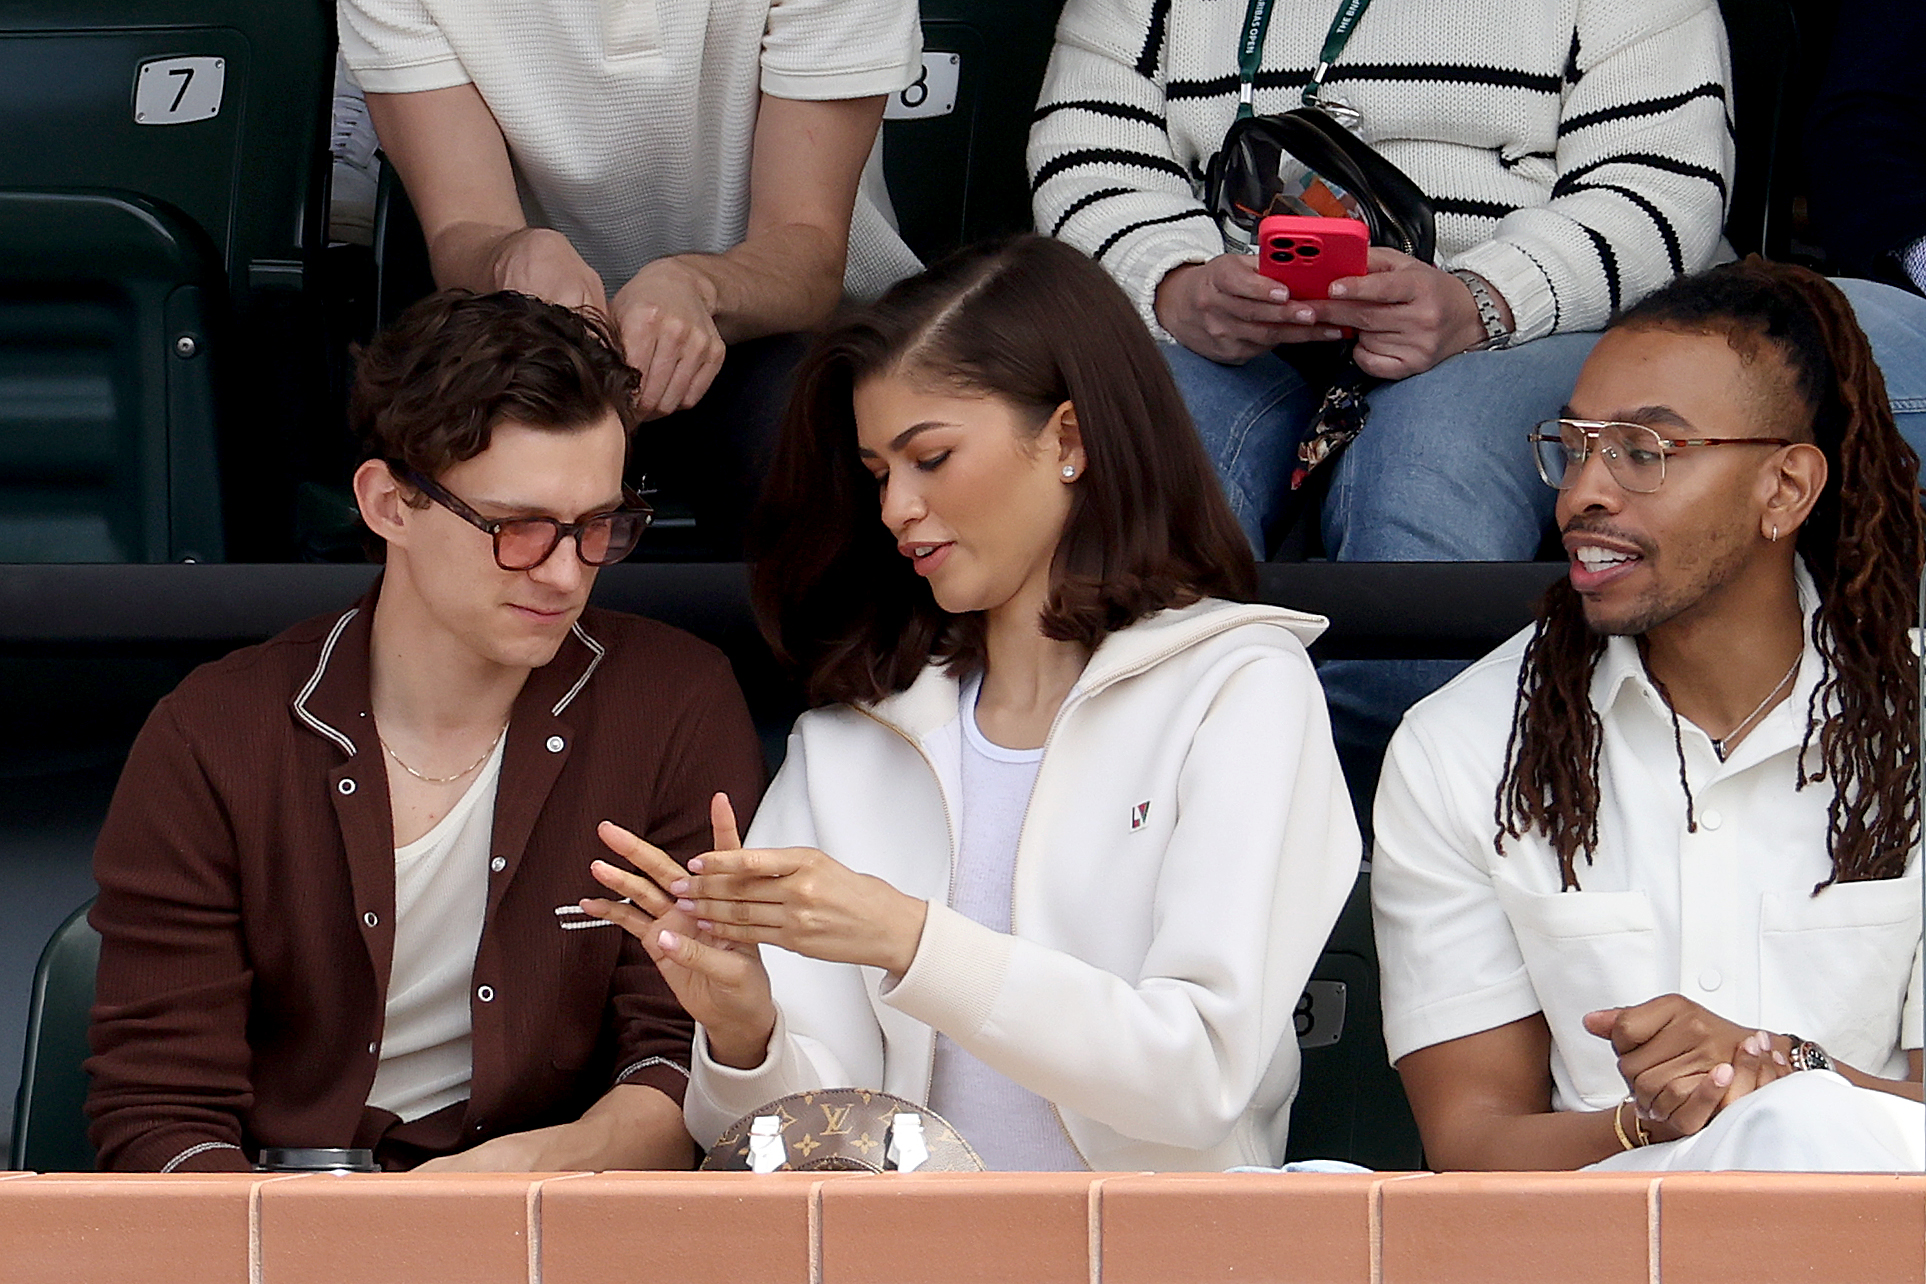 The pair were recently pictured at a tennis match together